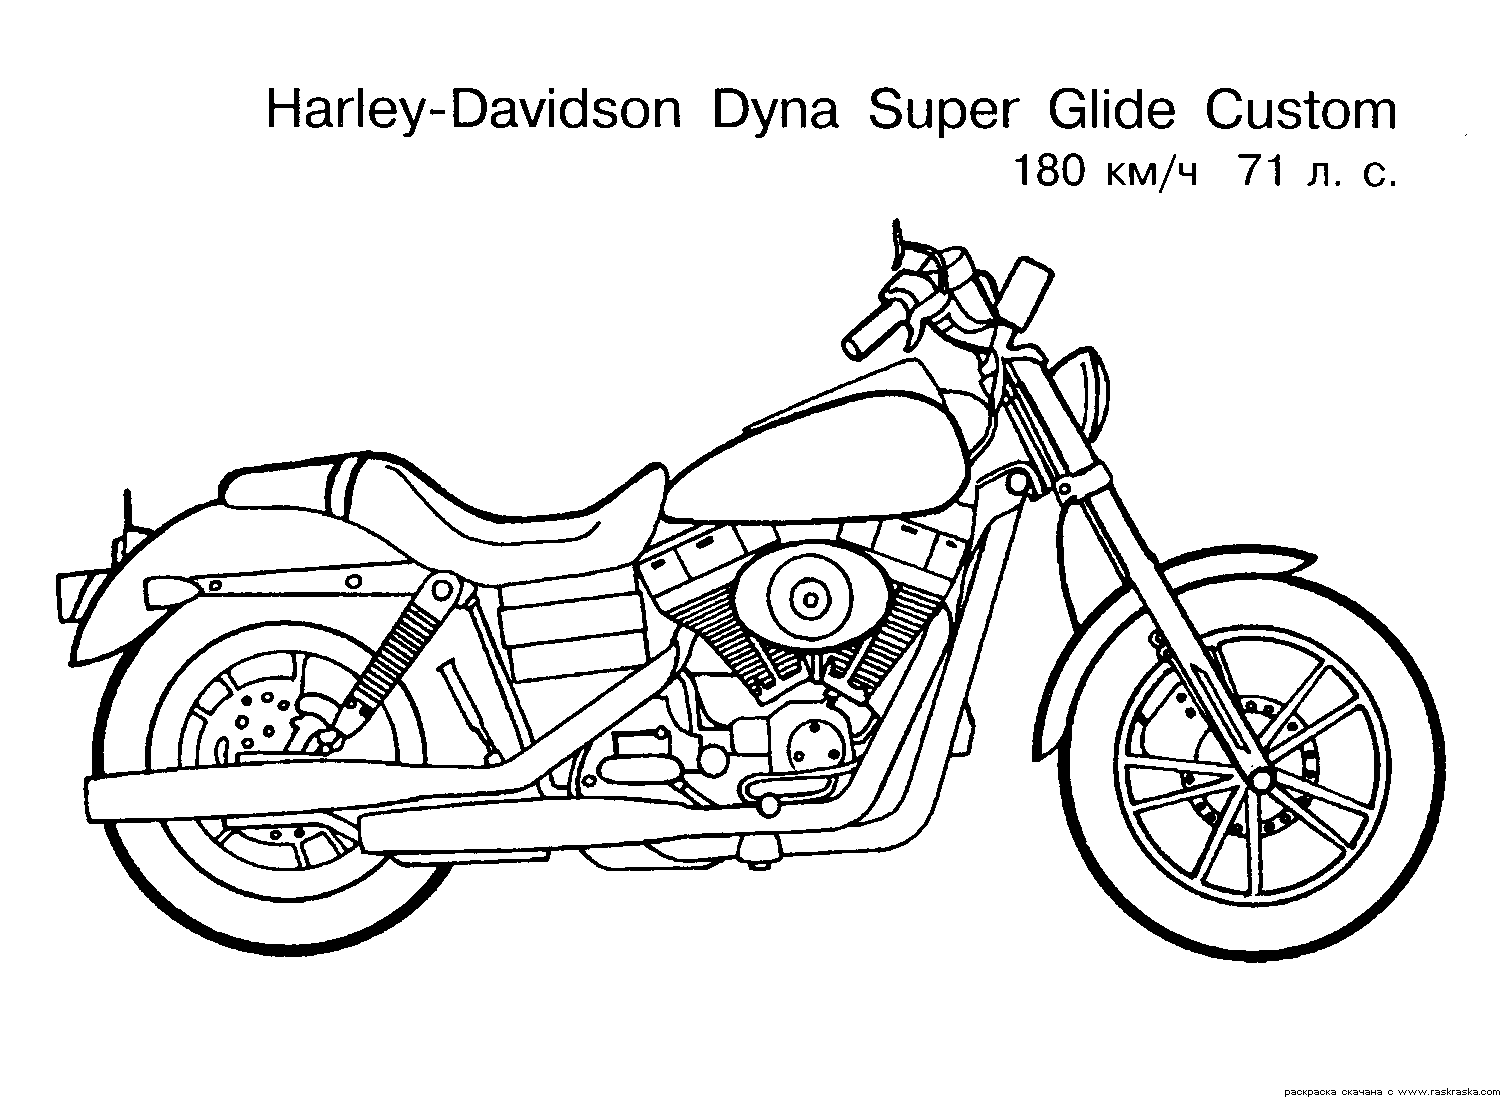 Free Motorcycle coloring page, letscoloringpages.com, Harley-Davidson Dyna Custom